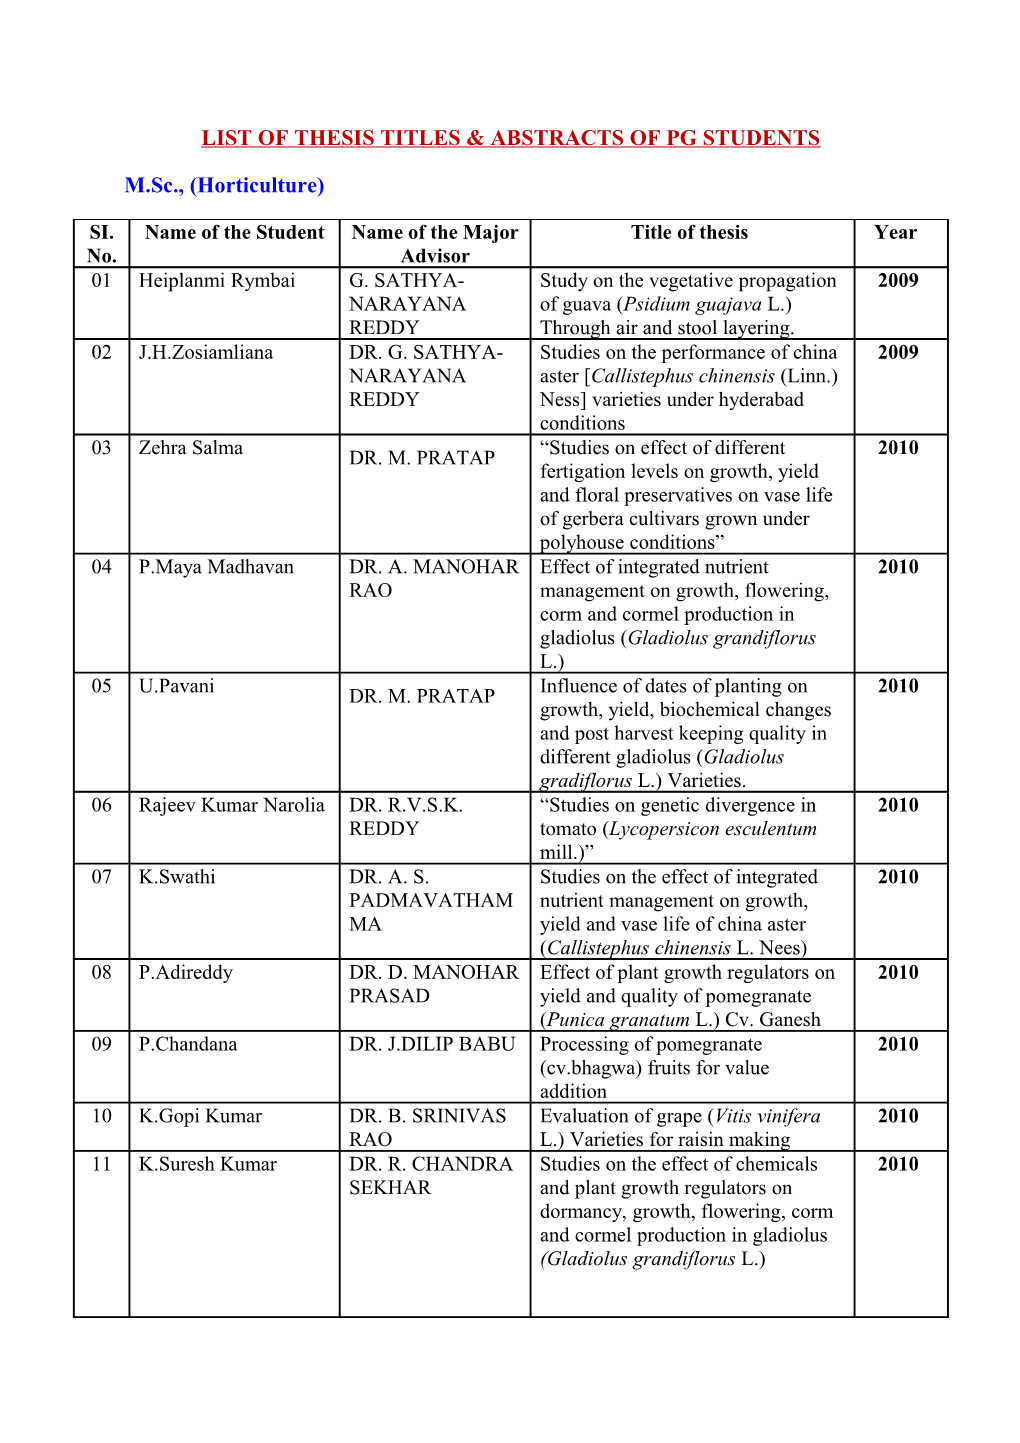 List of Thesis Titles & Abstracts of Pg Students